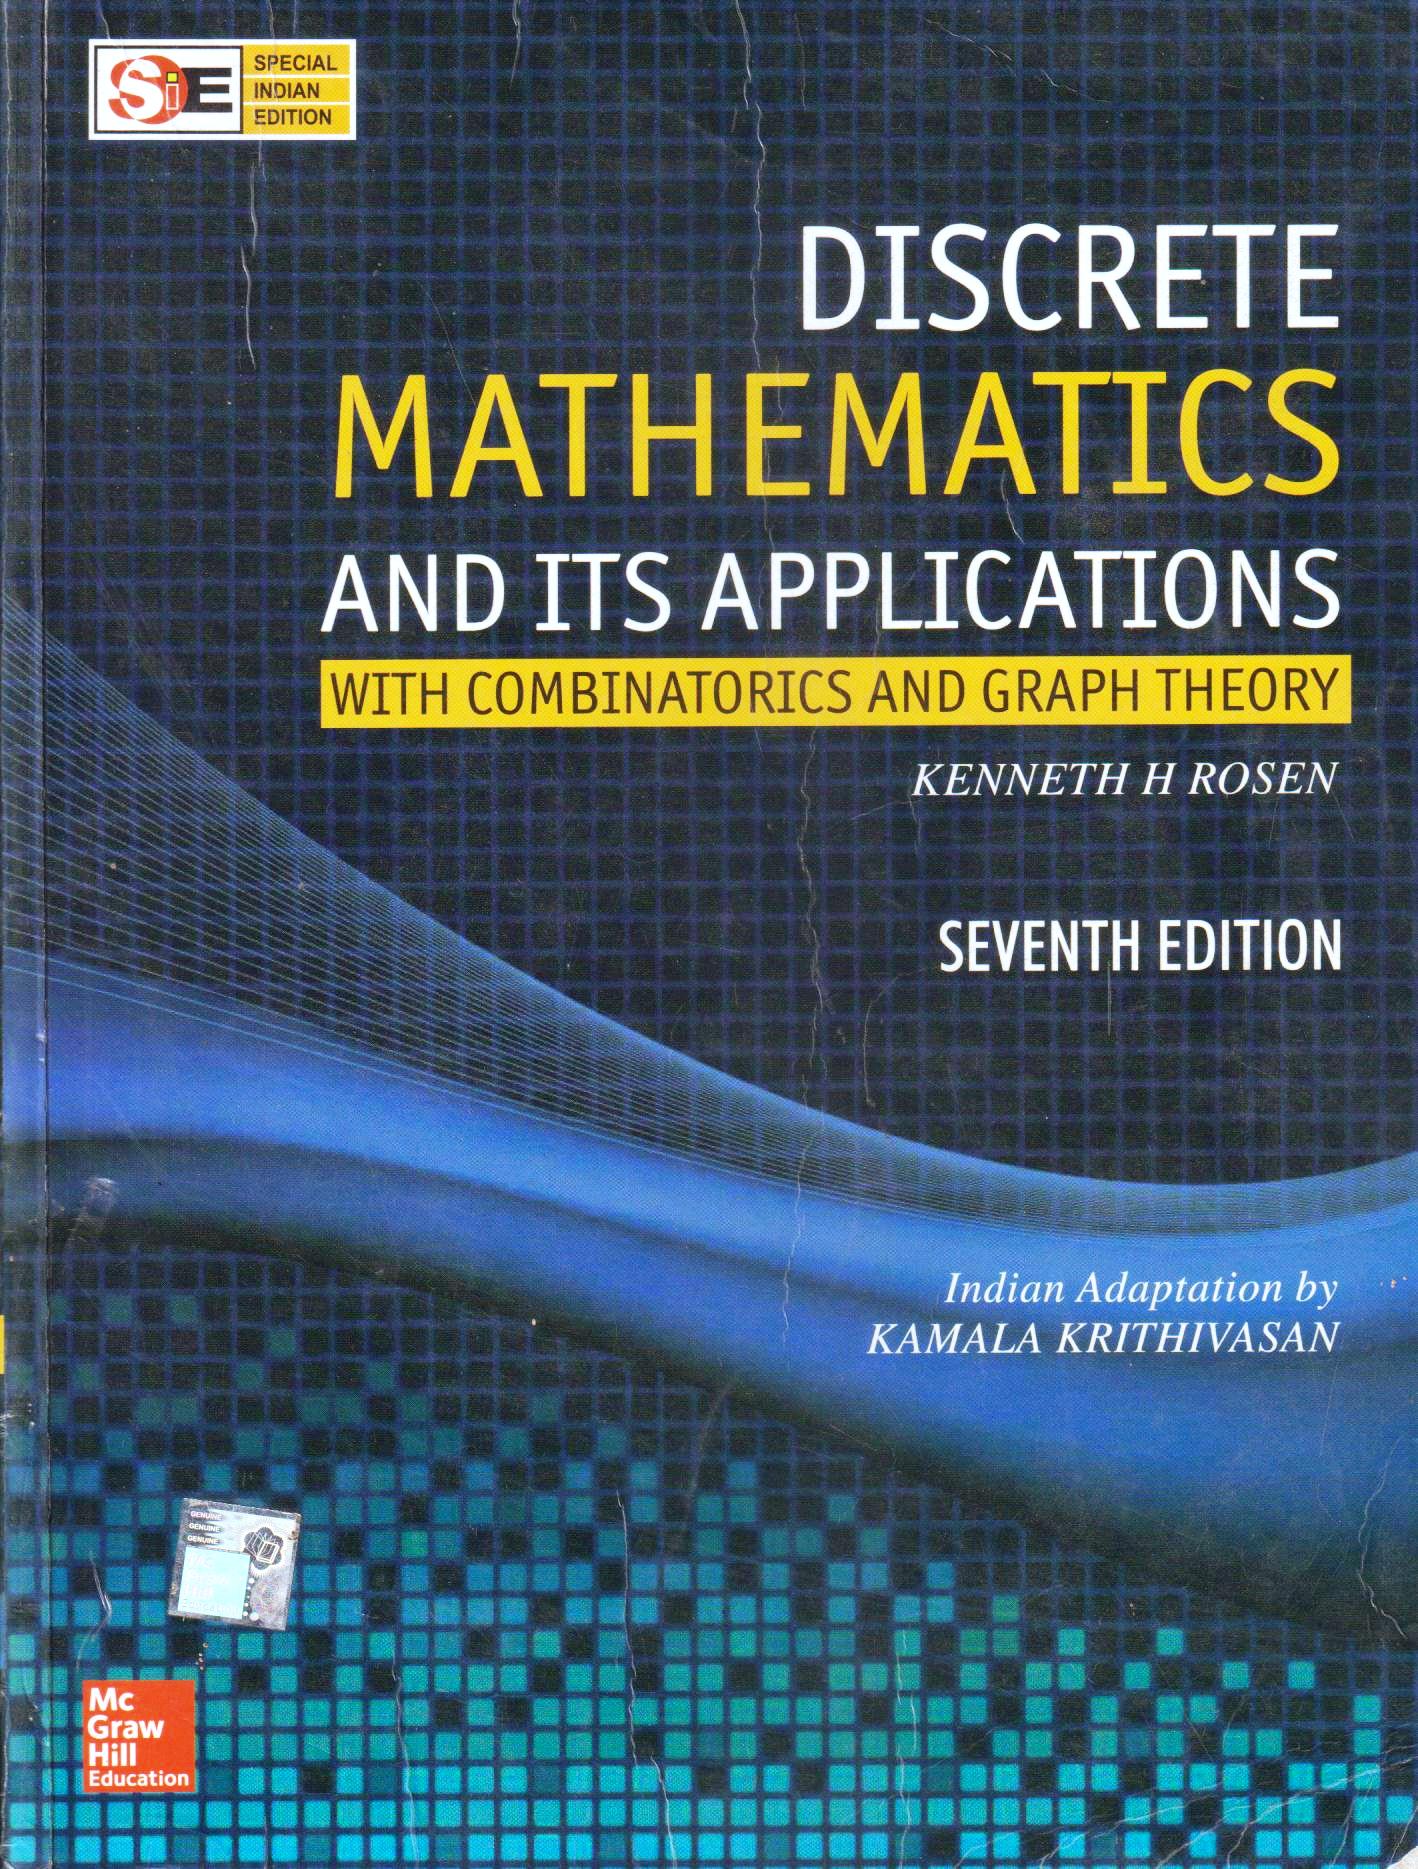 Applications　Combinatorics　Used　and　and　Jupiter　–　Graph　Theory　its　with　Mathematics　Discrete　Books